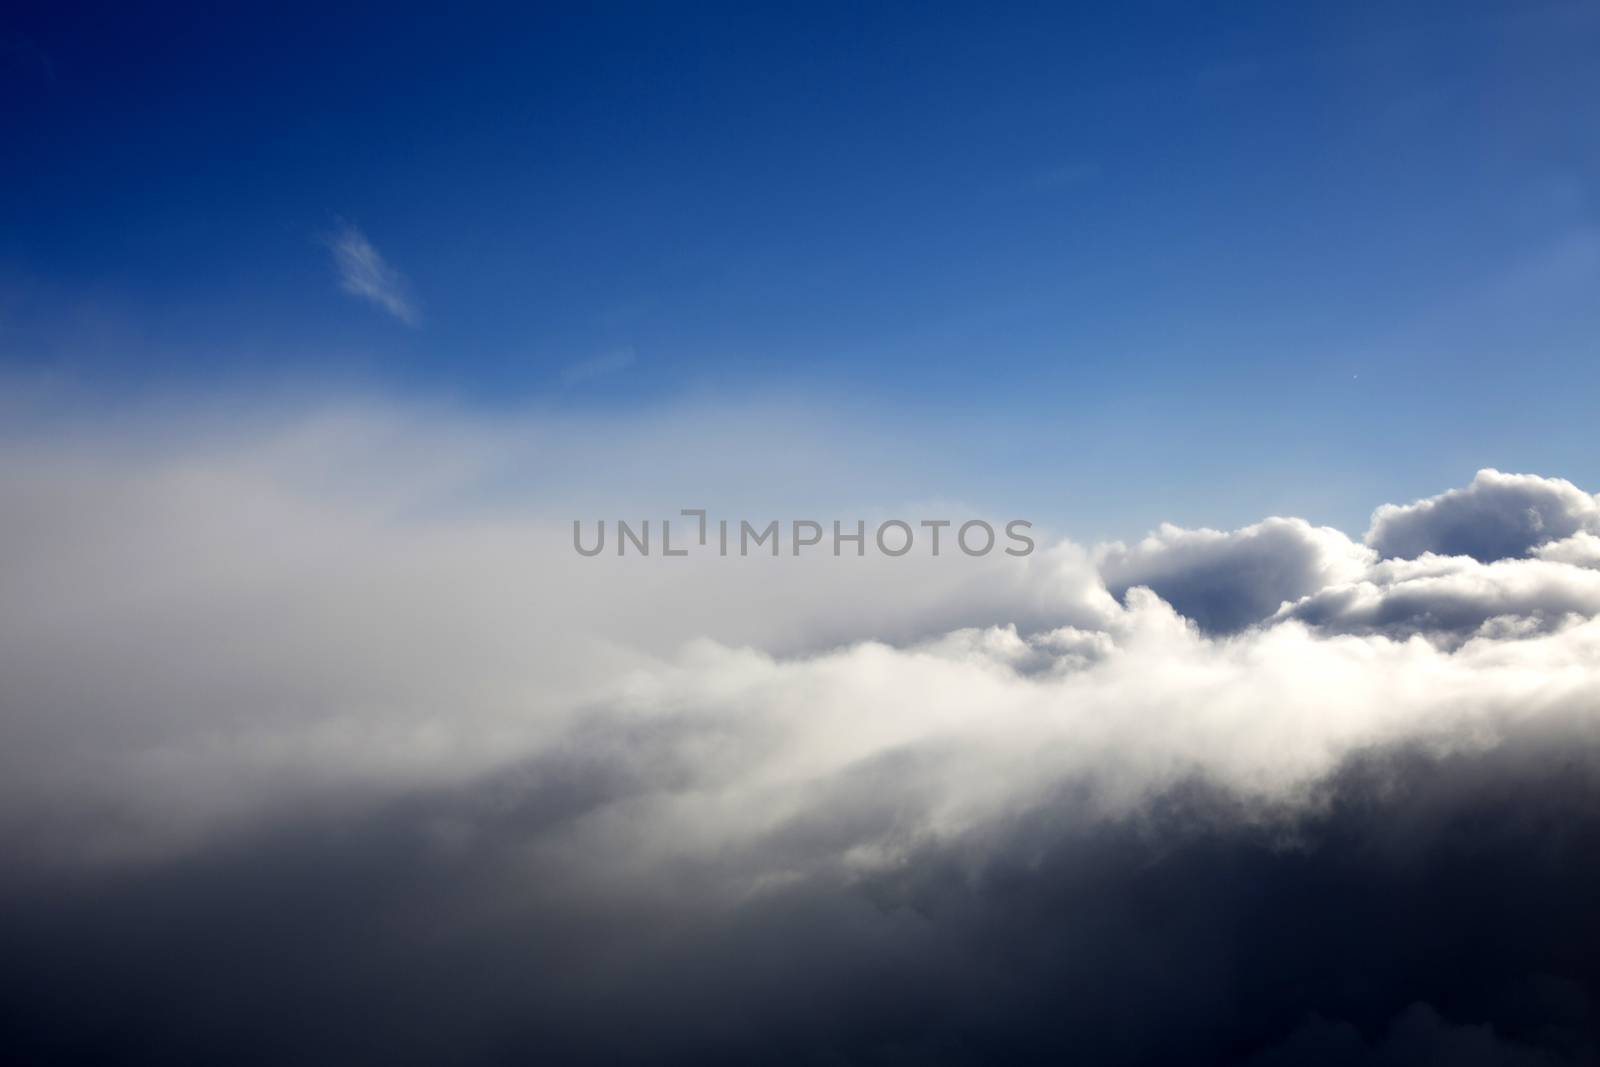 Whispy Cloud Scape at Altitude